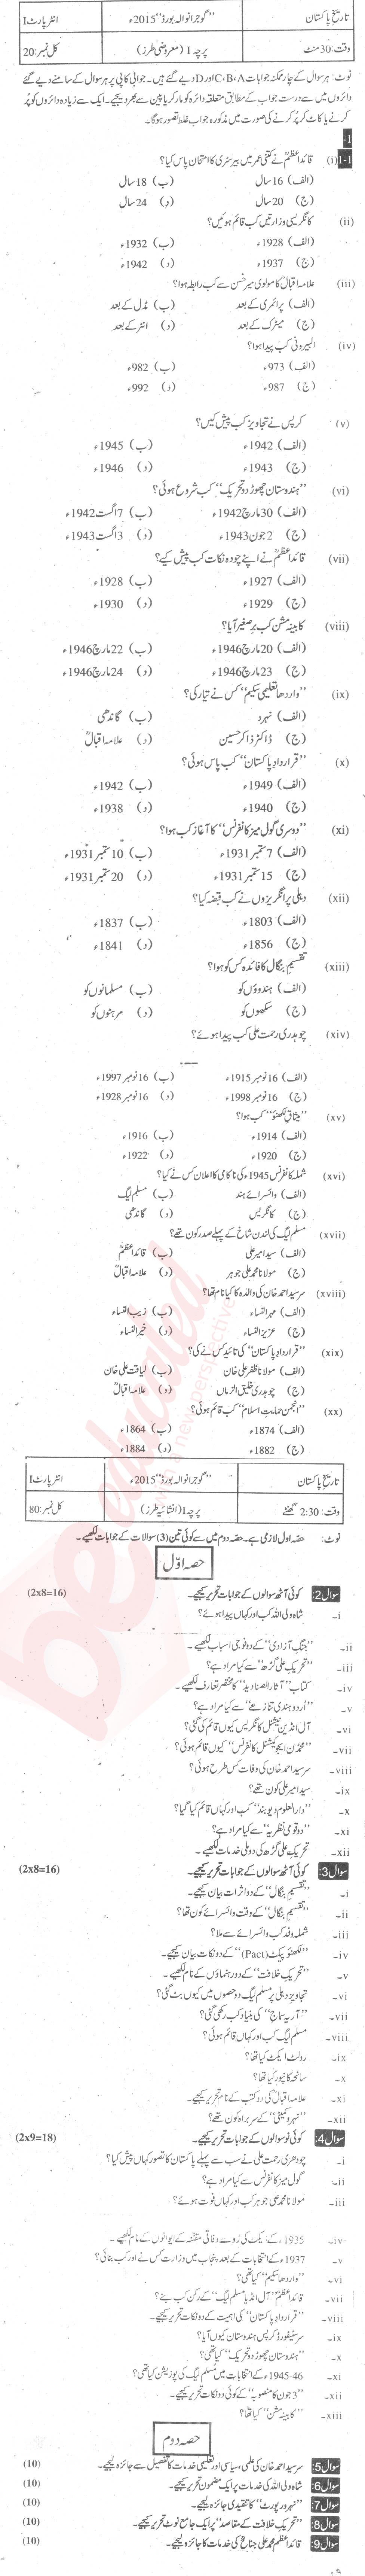 Pakistan History FA Part 1 Past Paper Group 1 BISE Gujranwala 2015